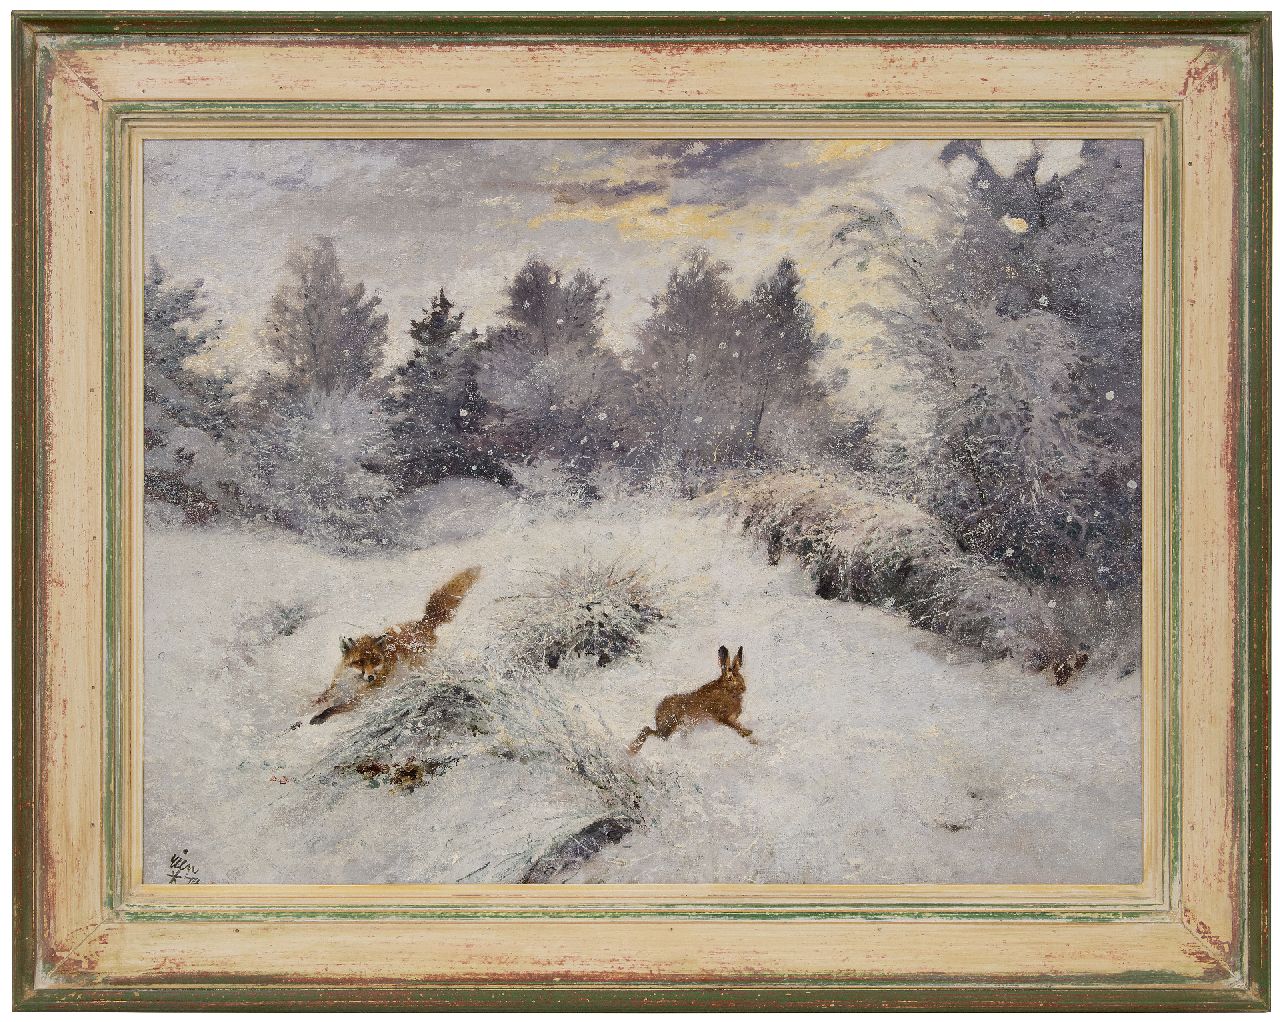 Poortvliet R.  | Rien Poortvliet, Hunting fox in a snowy landscape, oil on canvas 60.4 x 79.9 cm, signed l.l. and without frame